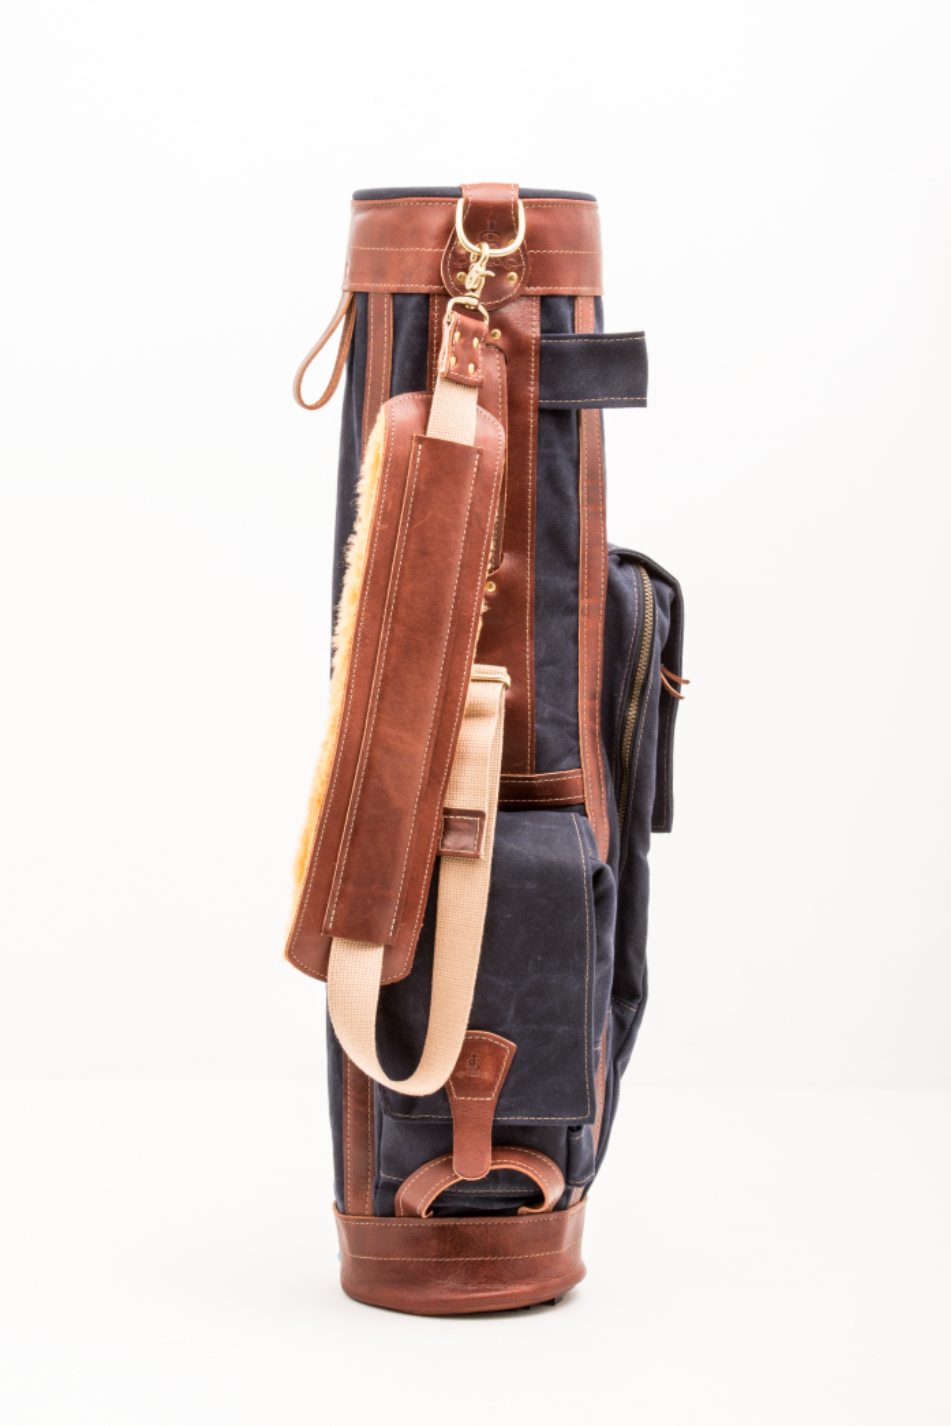 Leather and Canvas Airliner Golf Bag for Modern and Hickory Golf - Steurer & Jacoby